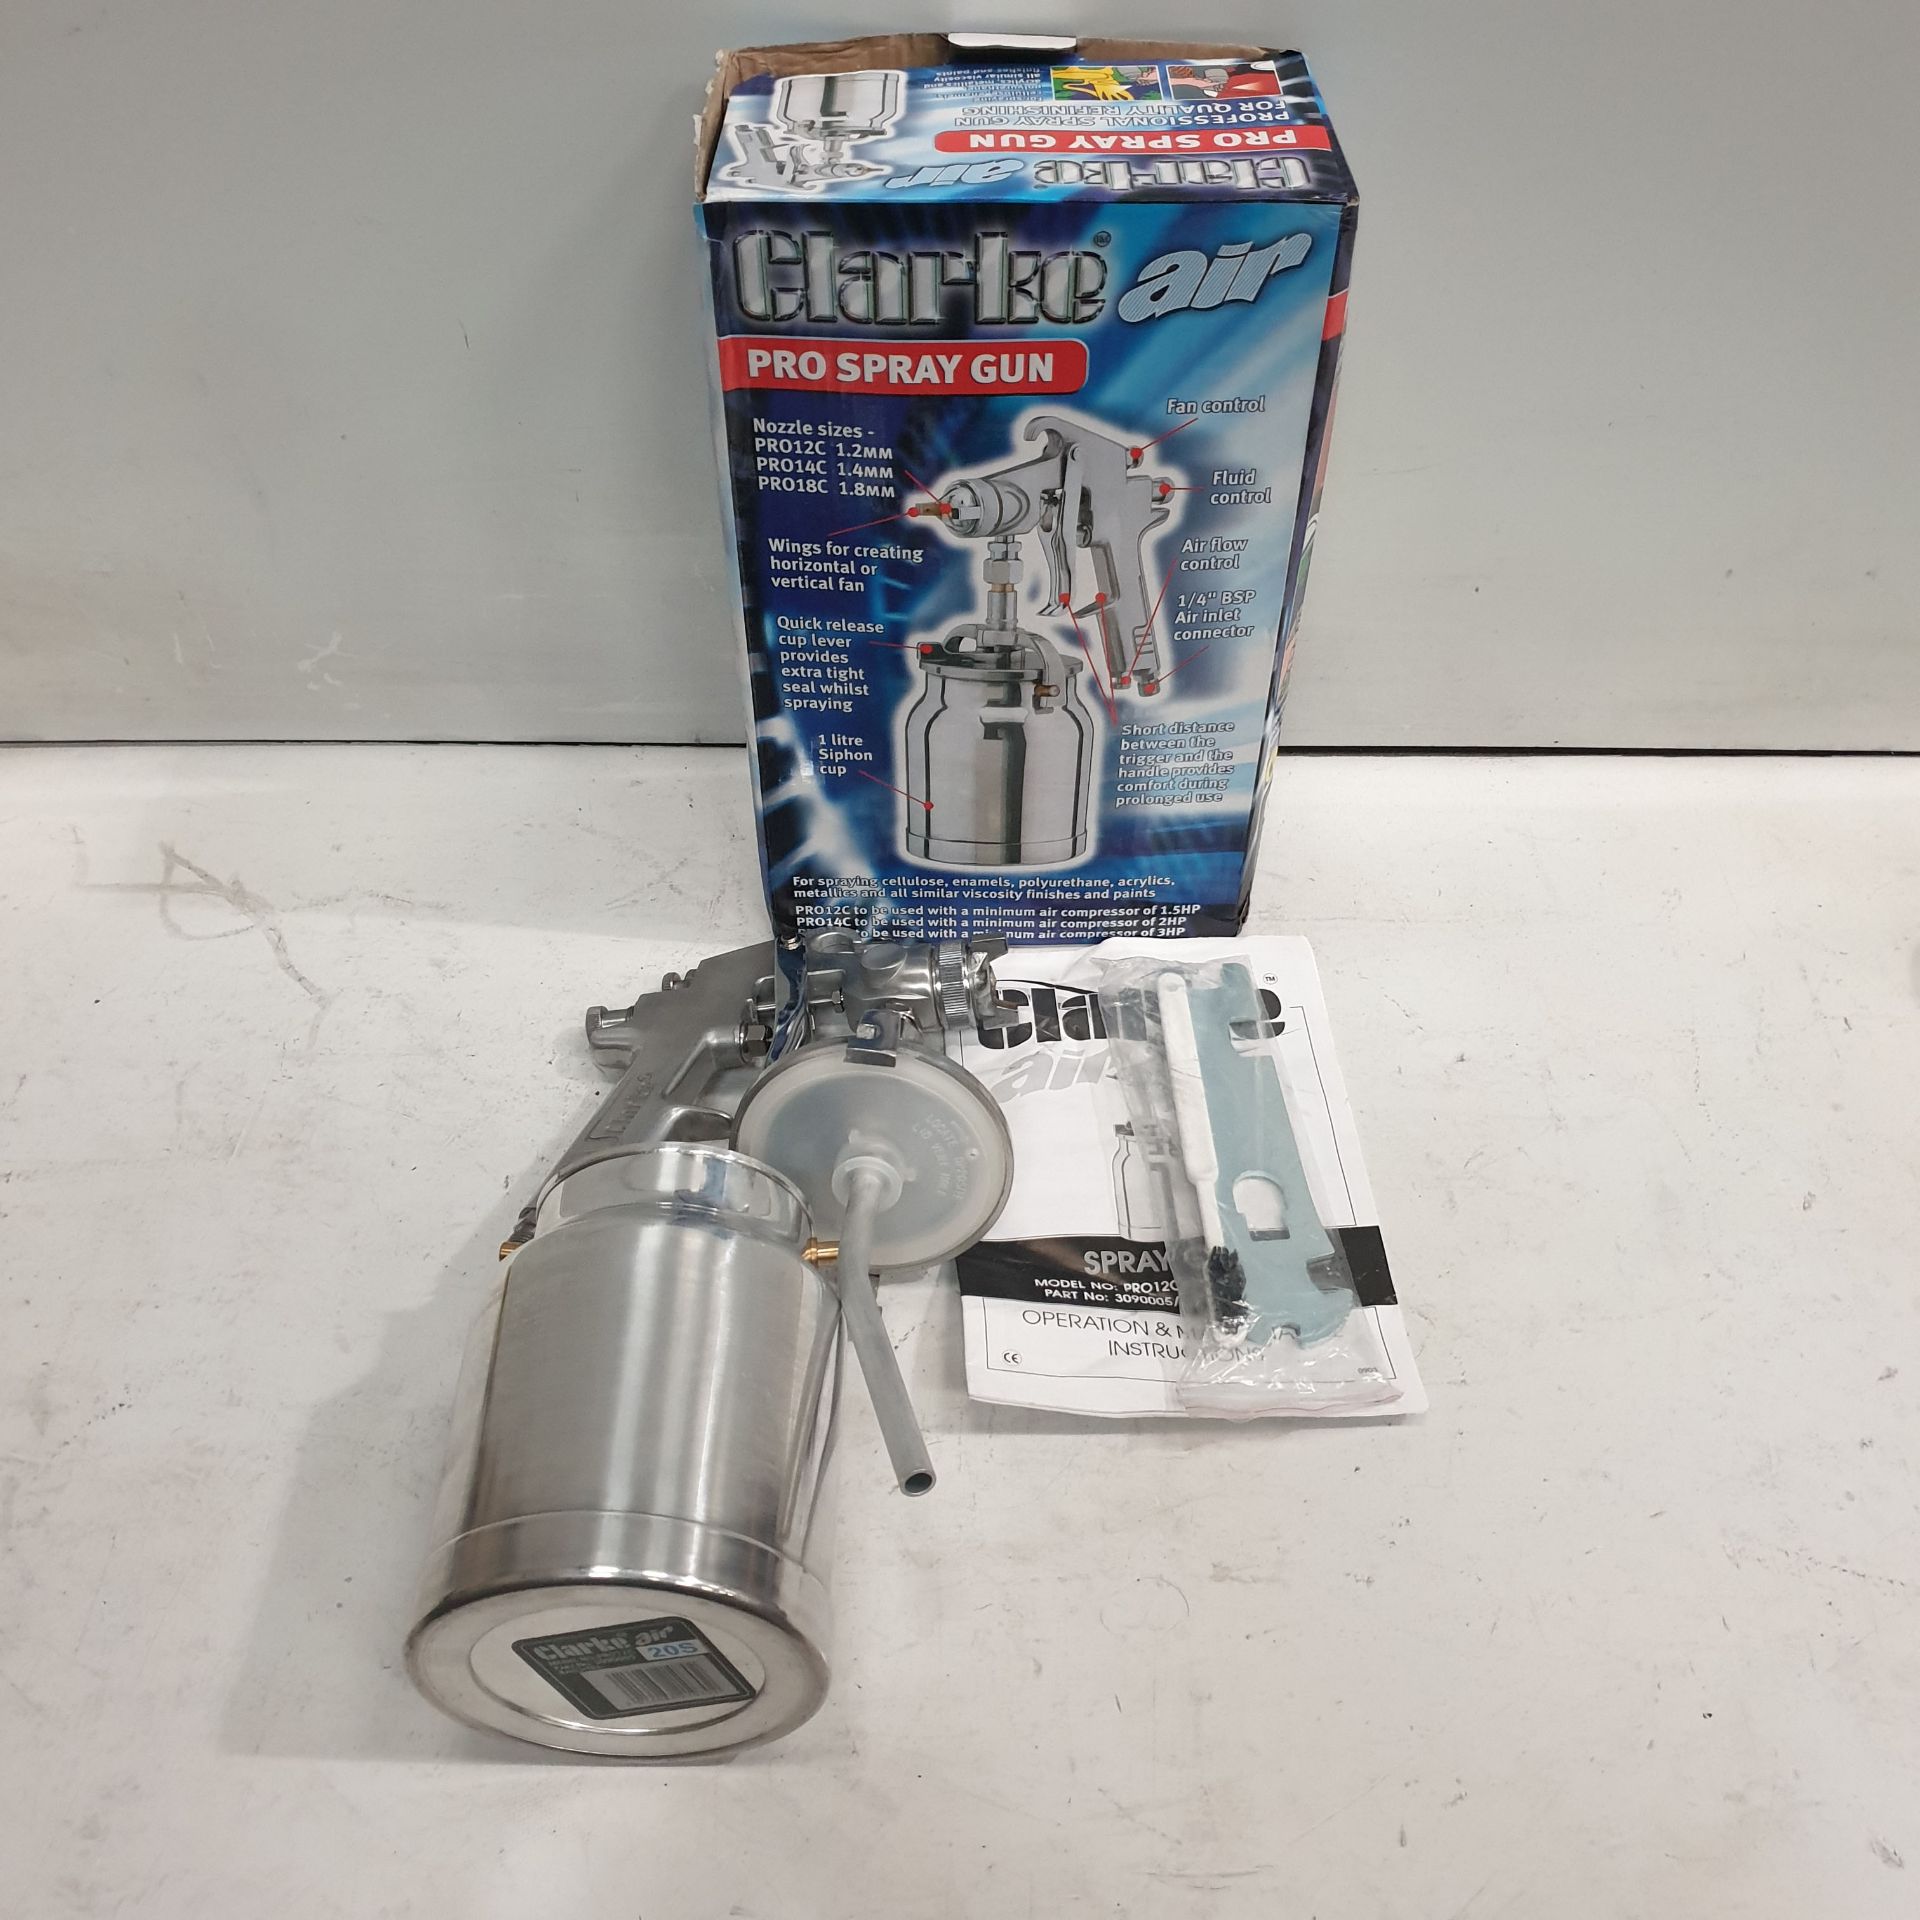 Clarke Air Pro Spray Gun with Fluid & Fan Control and Quick Release Siphon Cup.